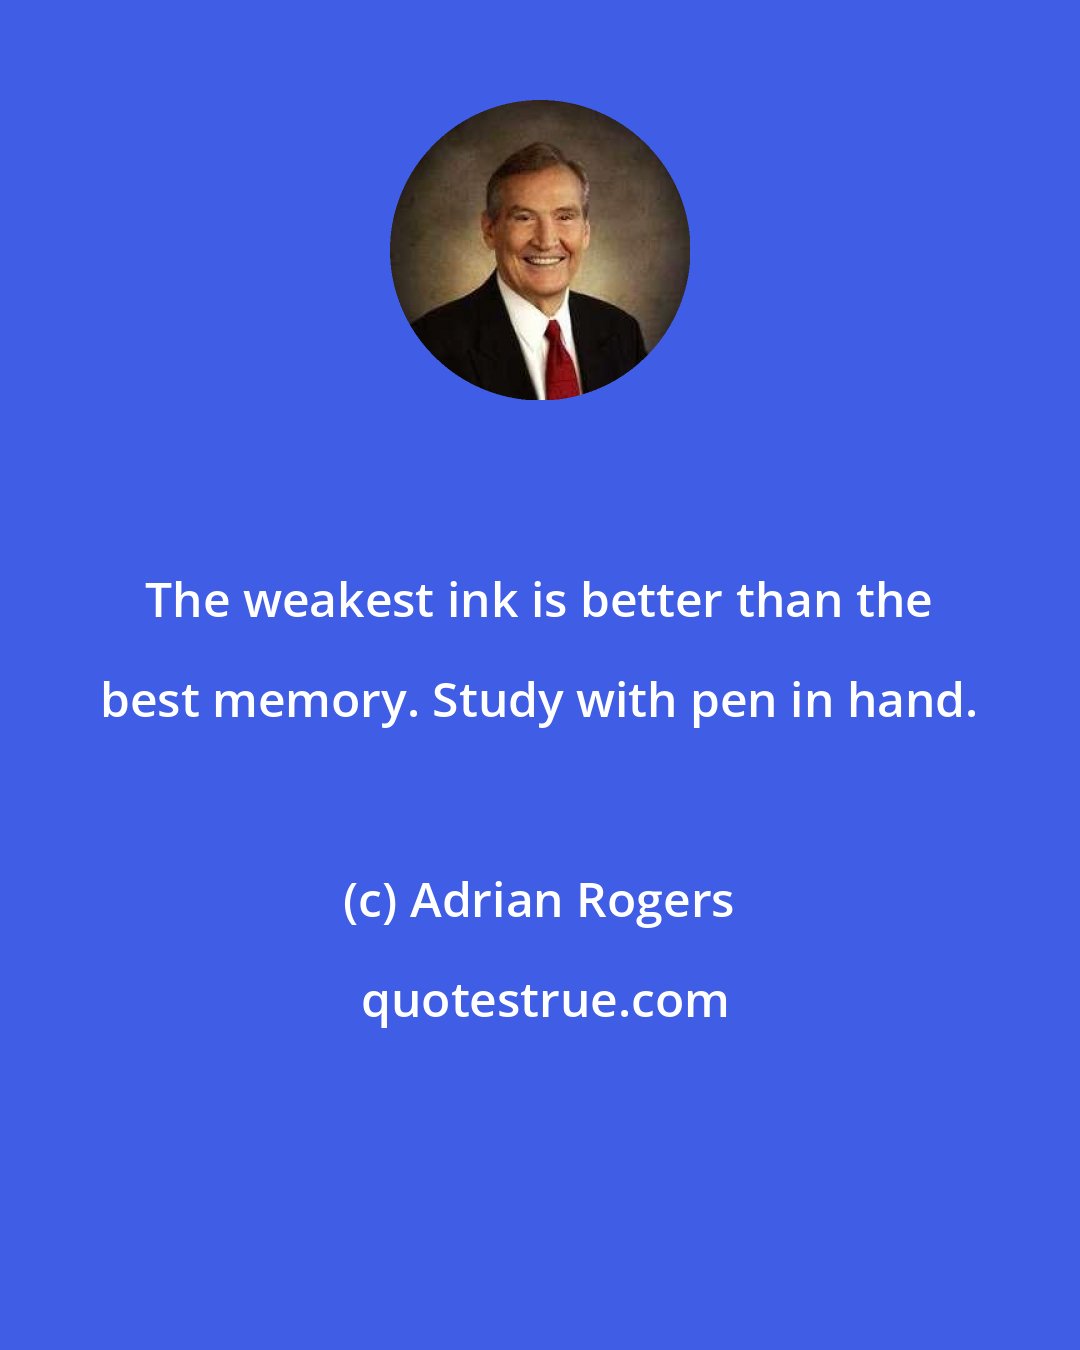 Adrian Rogers: The weakest ink is better than the best memory. Study with pen in hand.